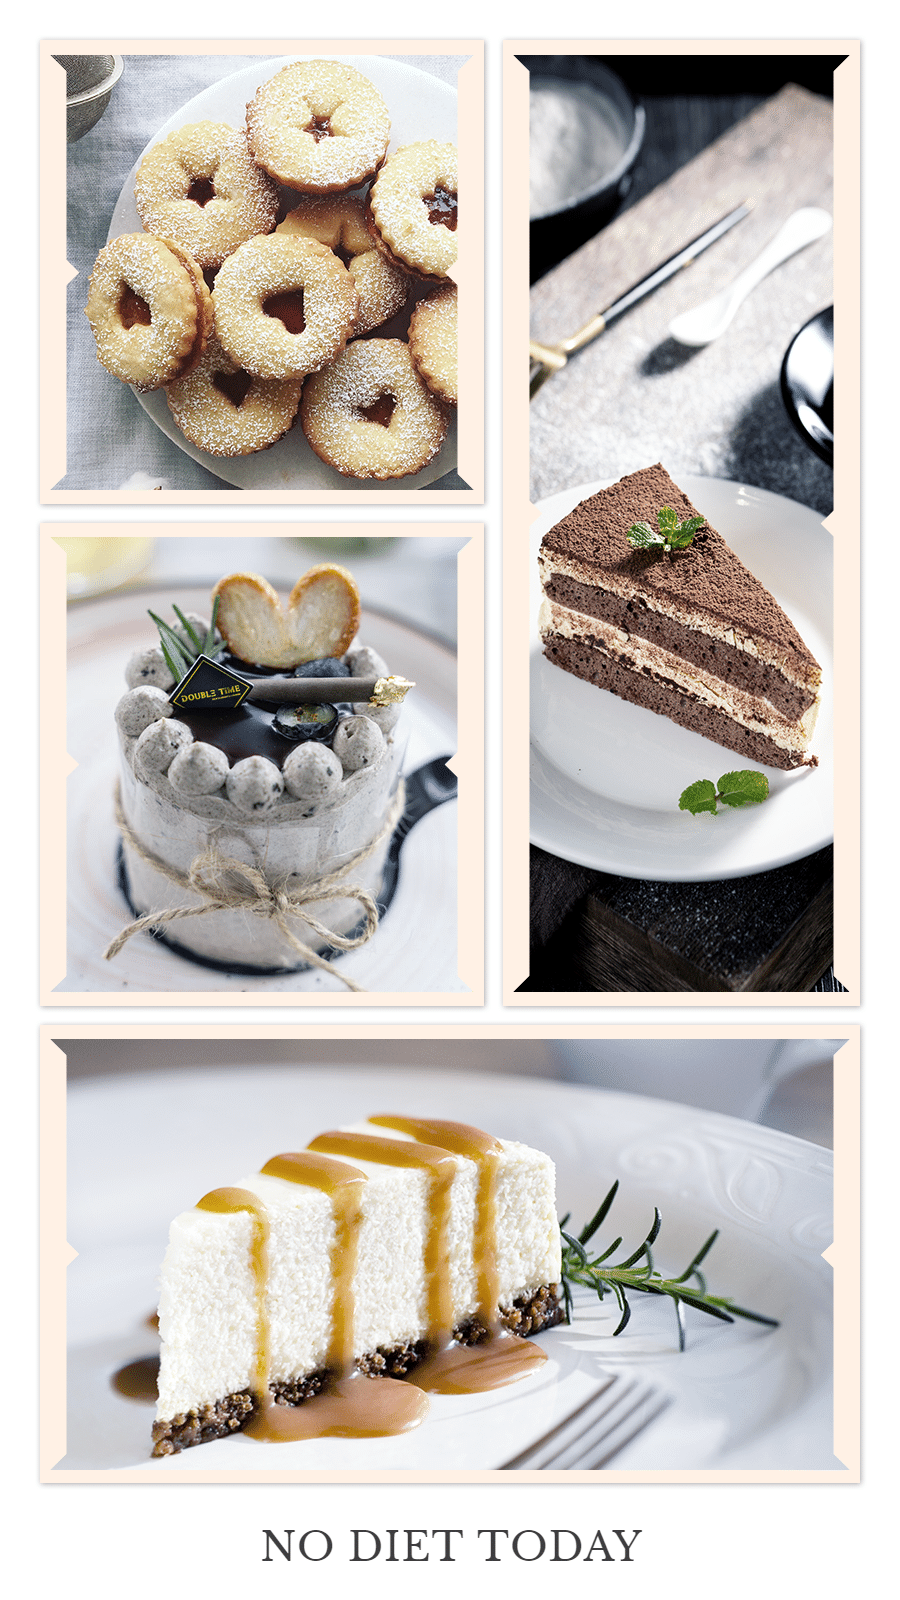 Delicious Food Bakery Dessert Menu Promotion Fashion Simple Style Poster Ecommerce Story预览效果